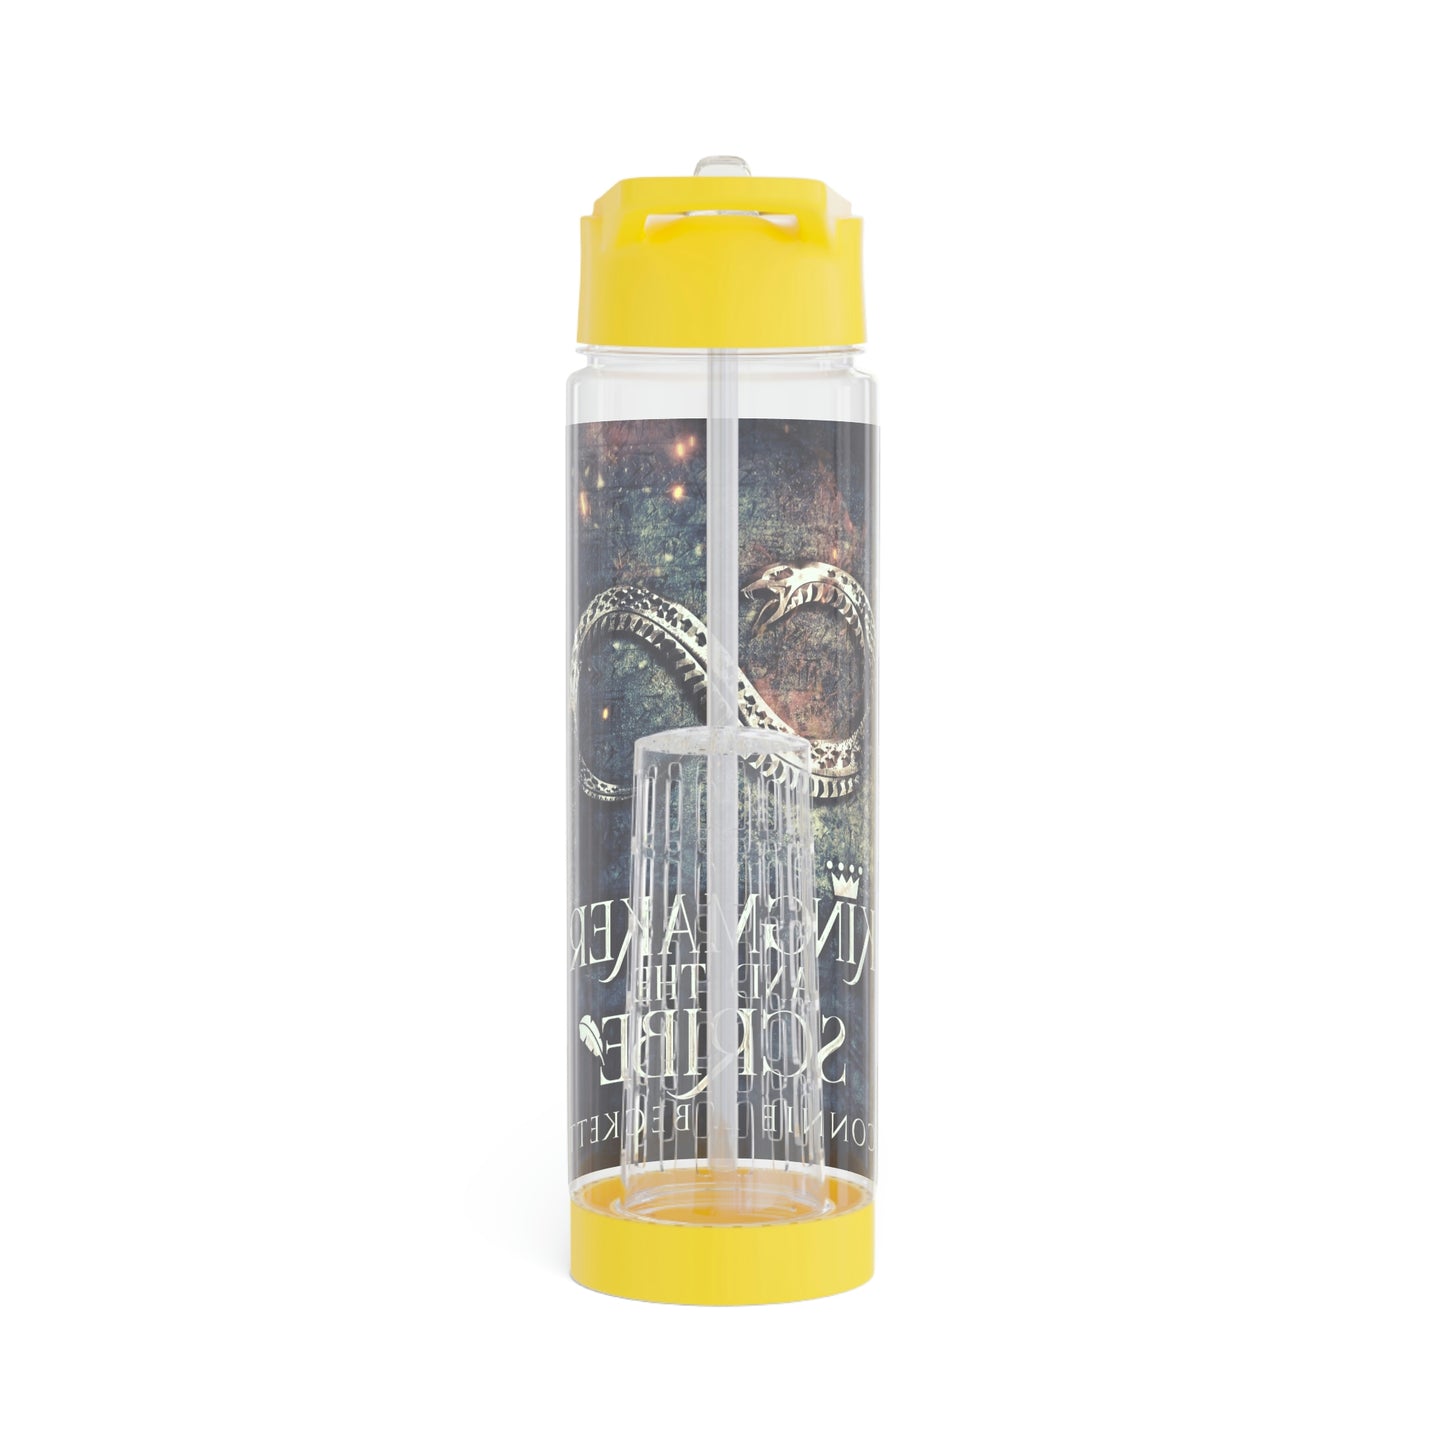 Kingmaker And The Scribe - Infuser Water Bottle